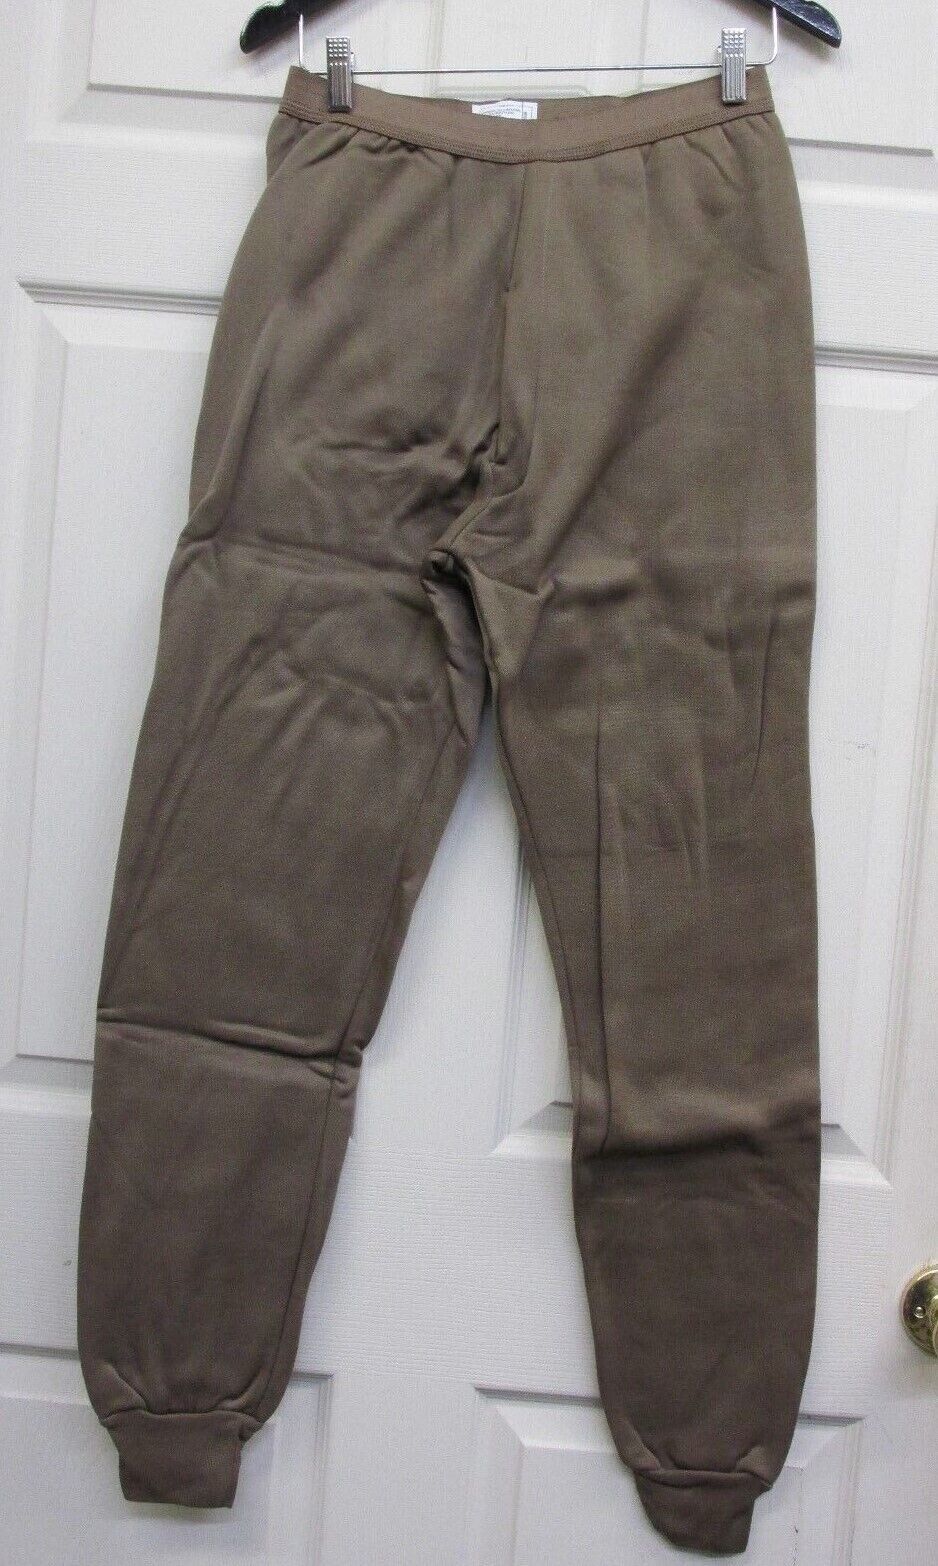 New USGI Polypro Cold Weather Drawers Pants ECWCS Thermal Army Brown - Medium